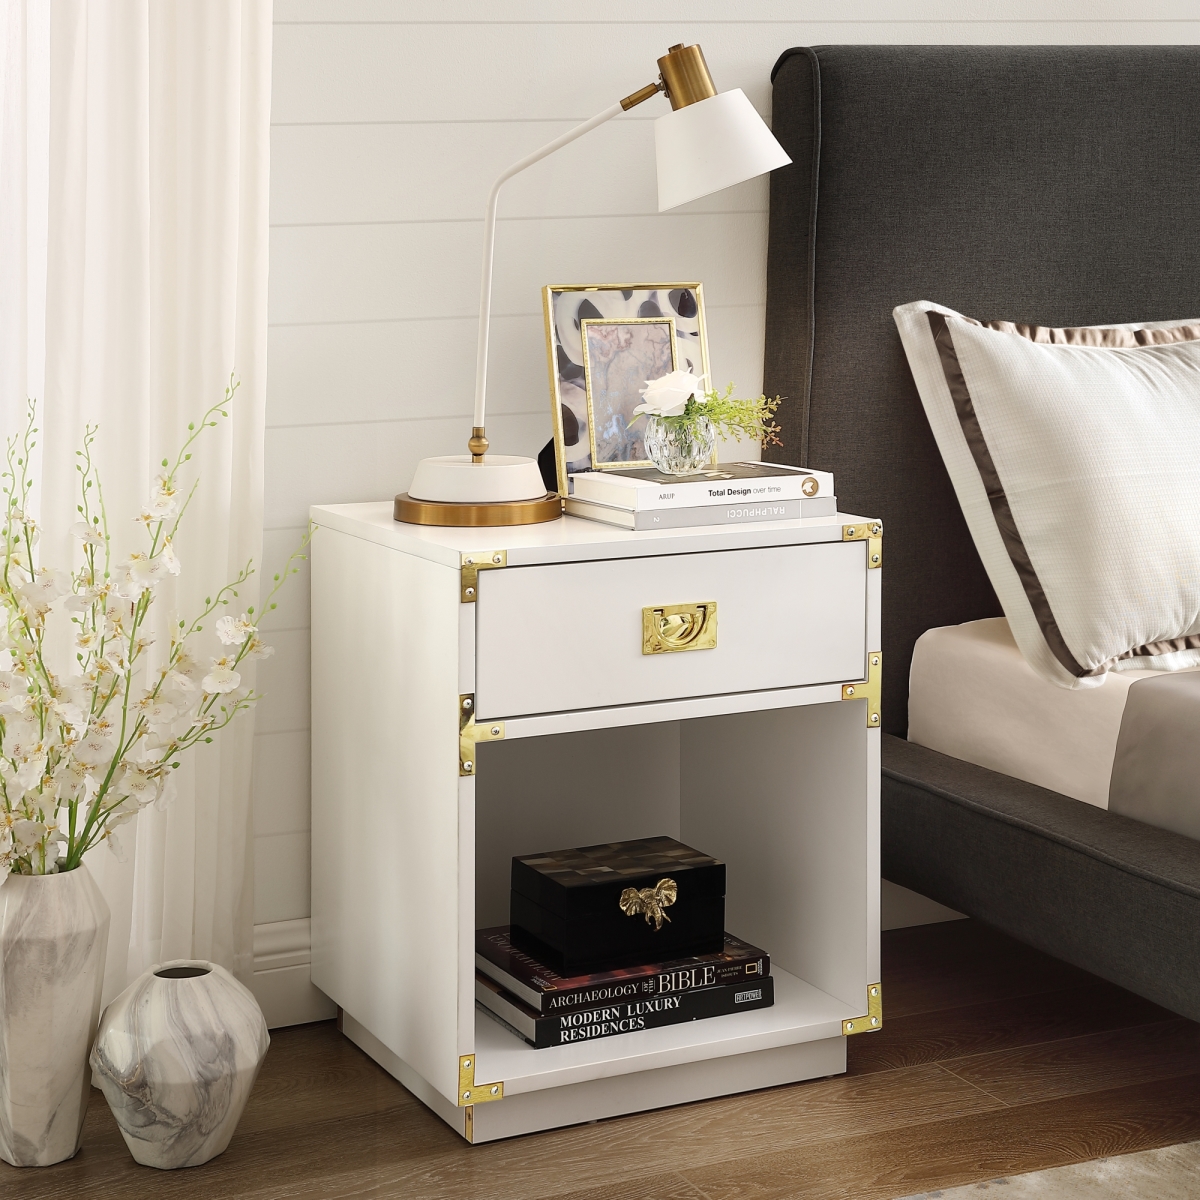 St154-09wg-ue Posh Living Angela Side Table, Accent Table & Nightstand, White - 20 X 18 X 24 In.